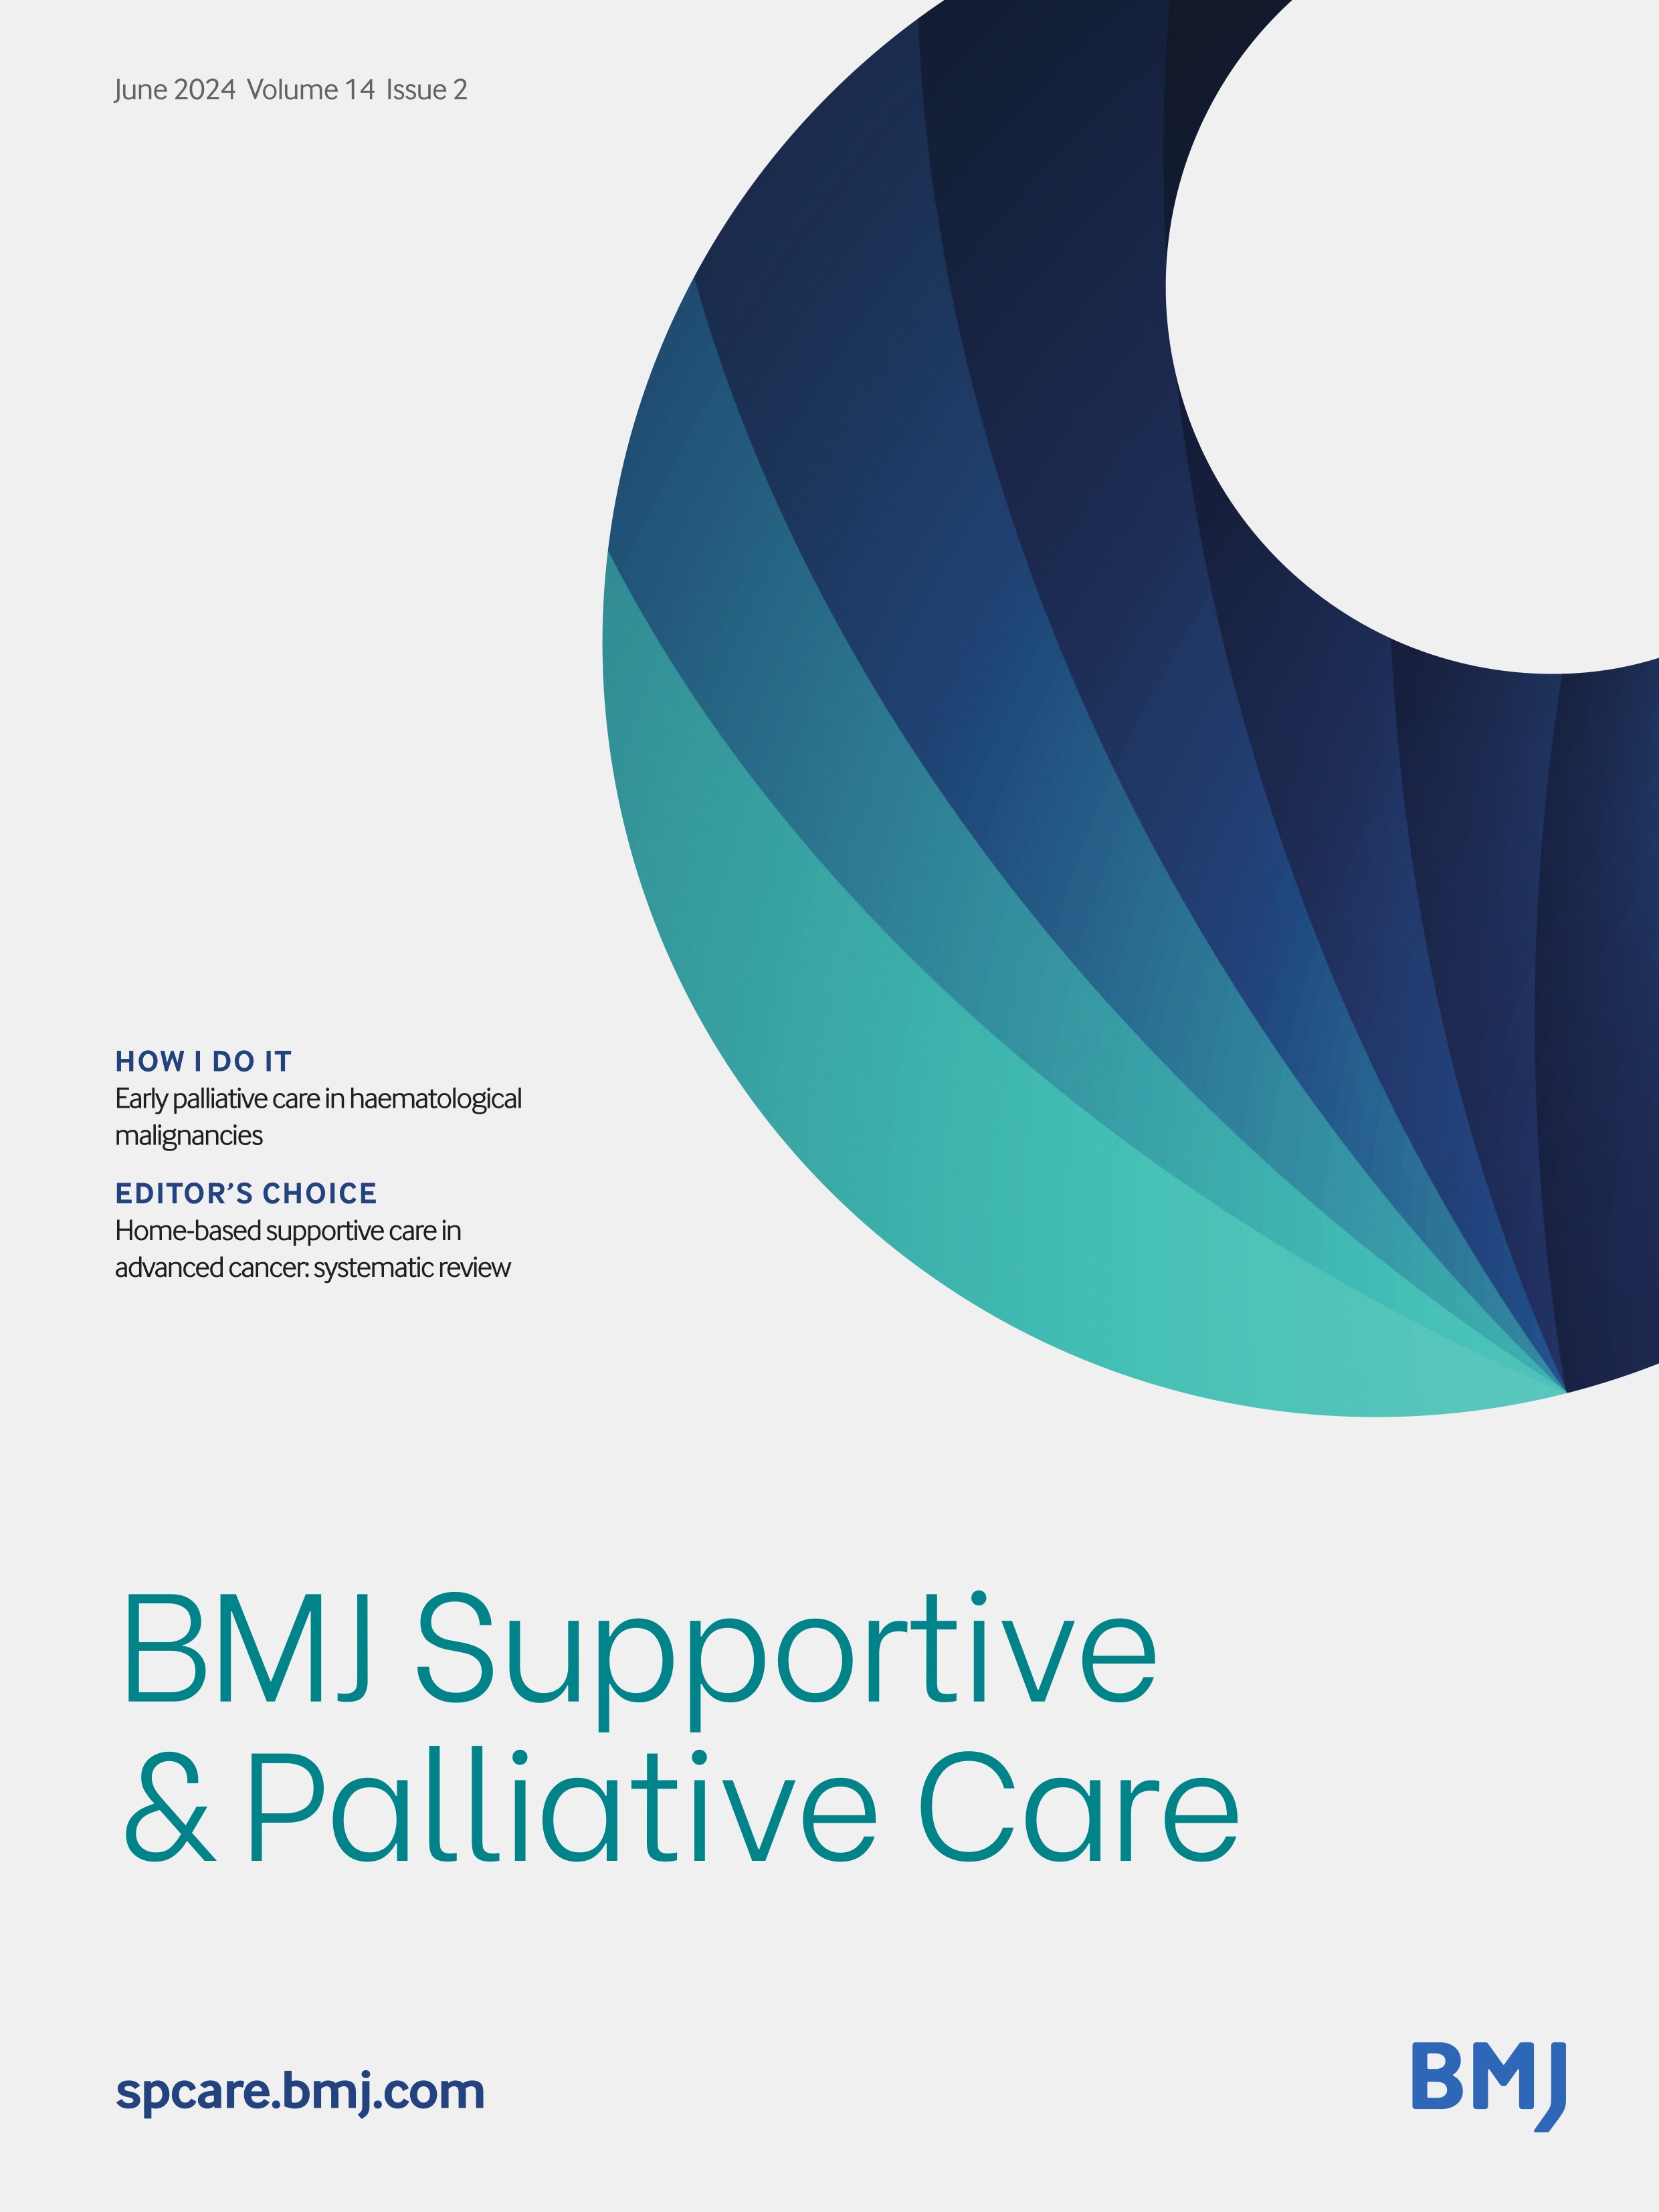 Supportive relationships between patients and family caregivers in specialist palliative care: a qualitative study of barriers and facilitators